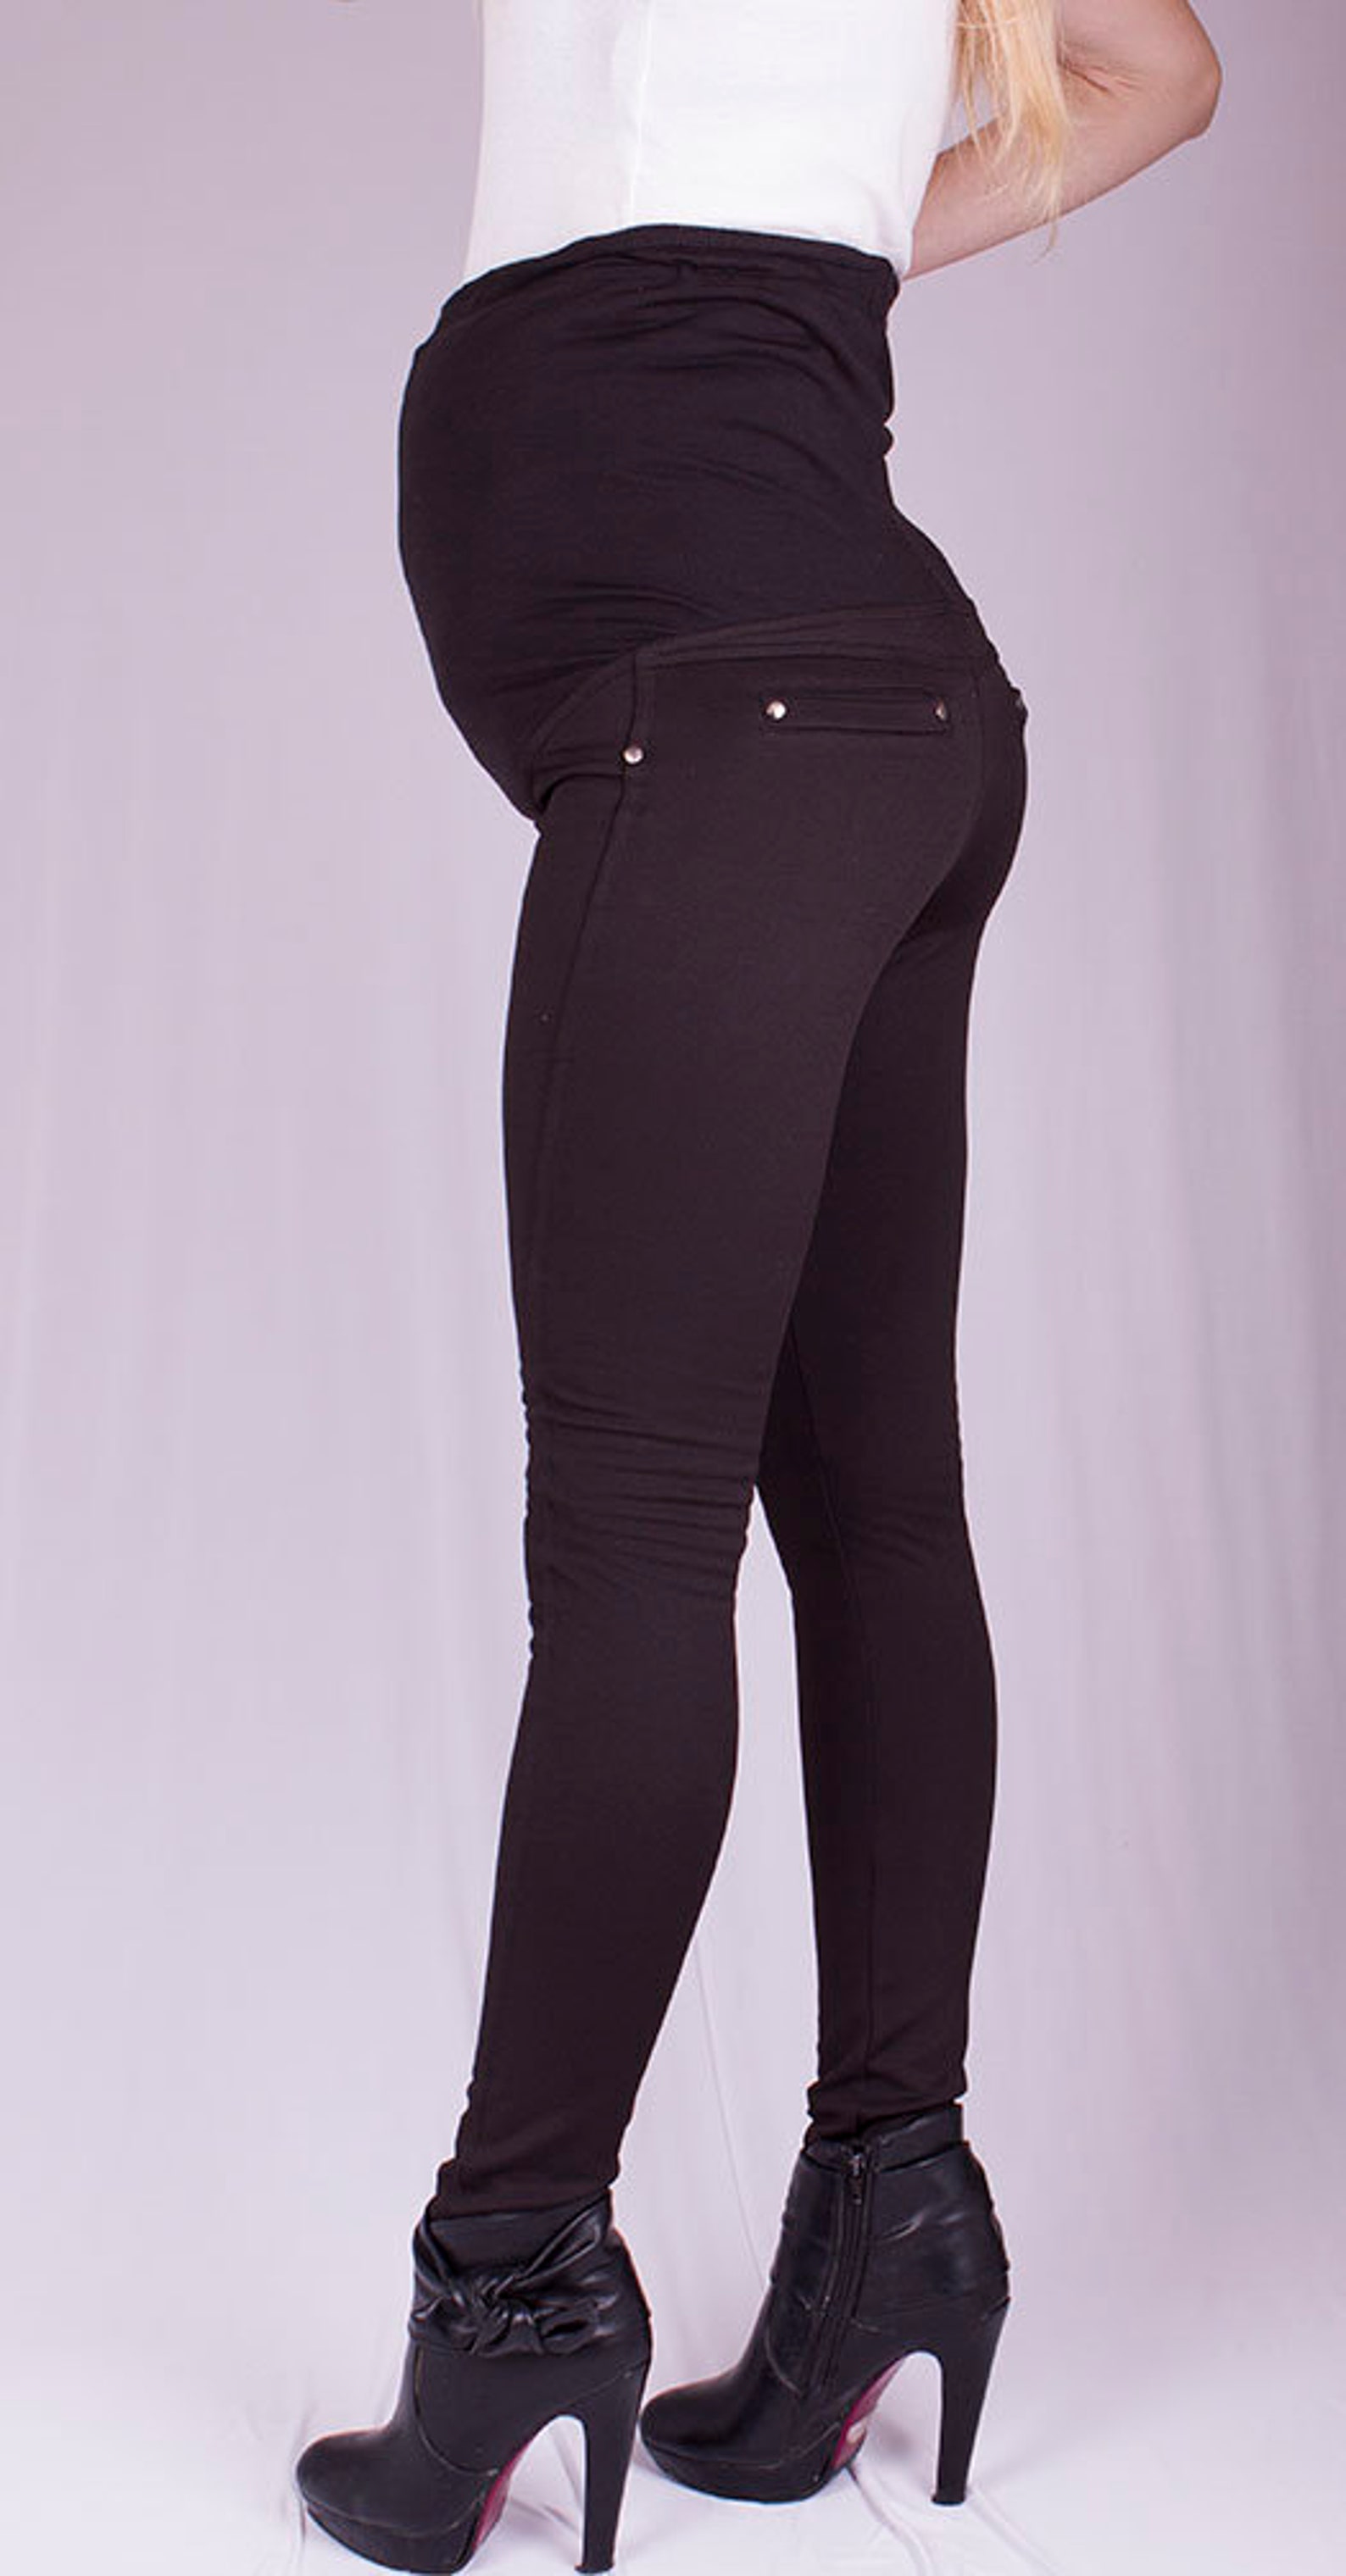 Over Belly Skinny Maternity Jeans - Isabel Maternity by Ingrid & Isabel